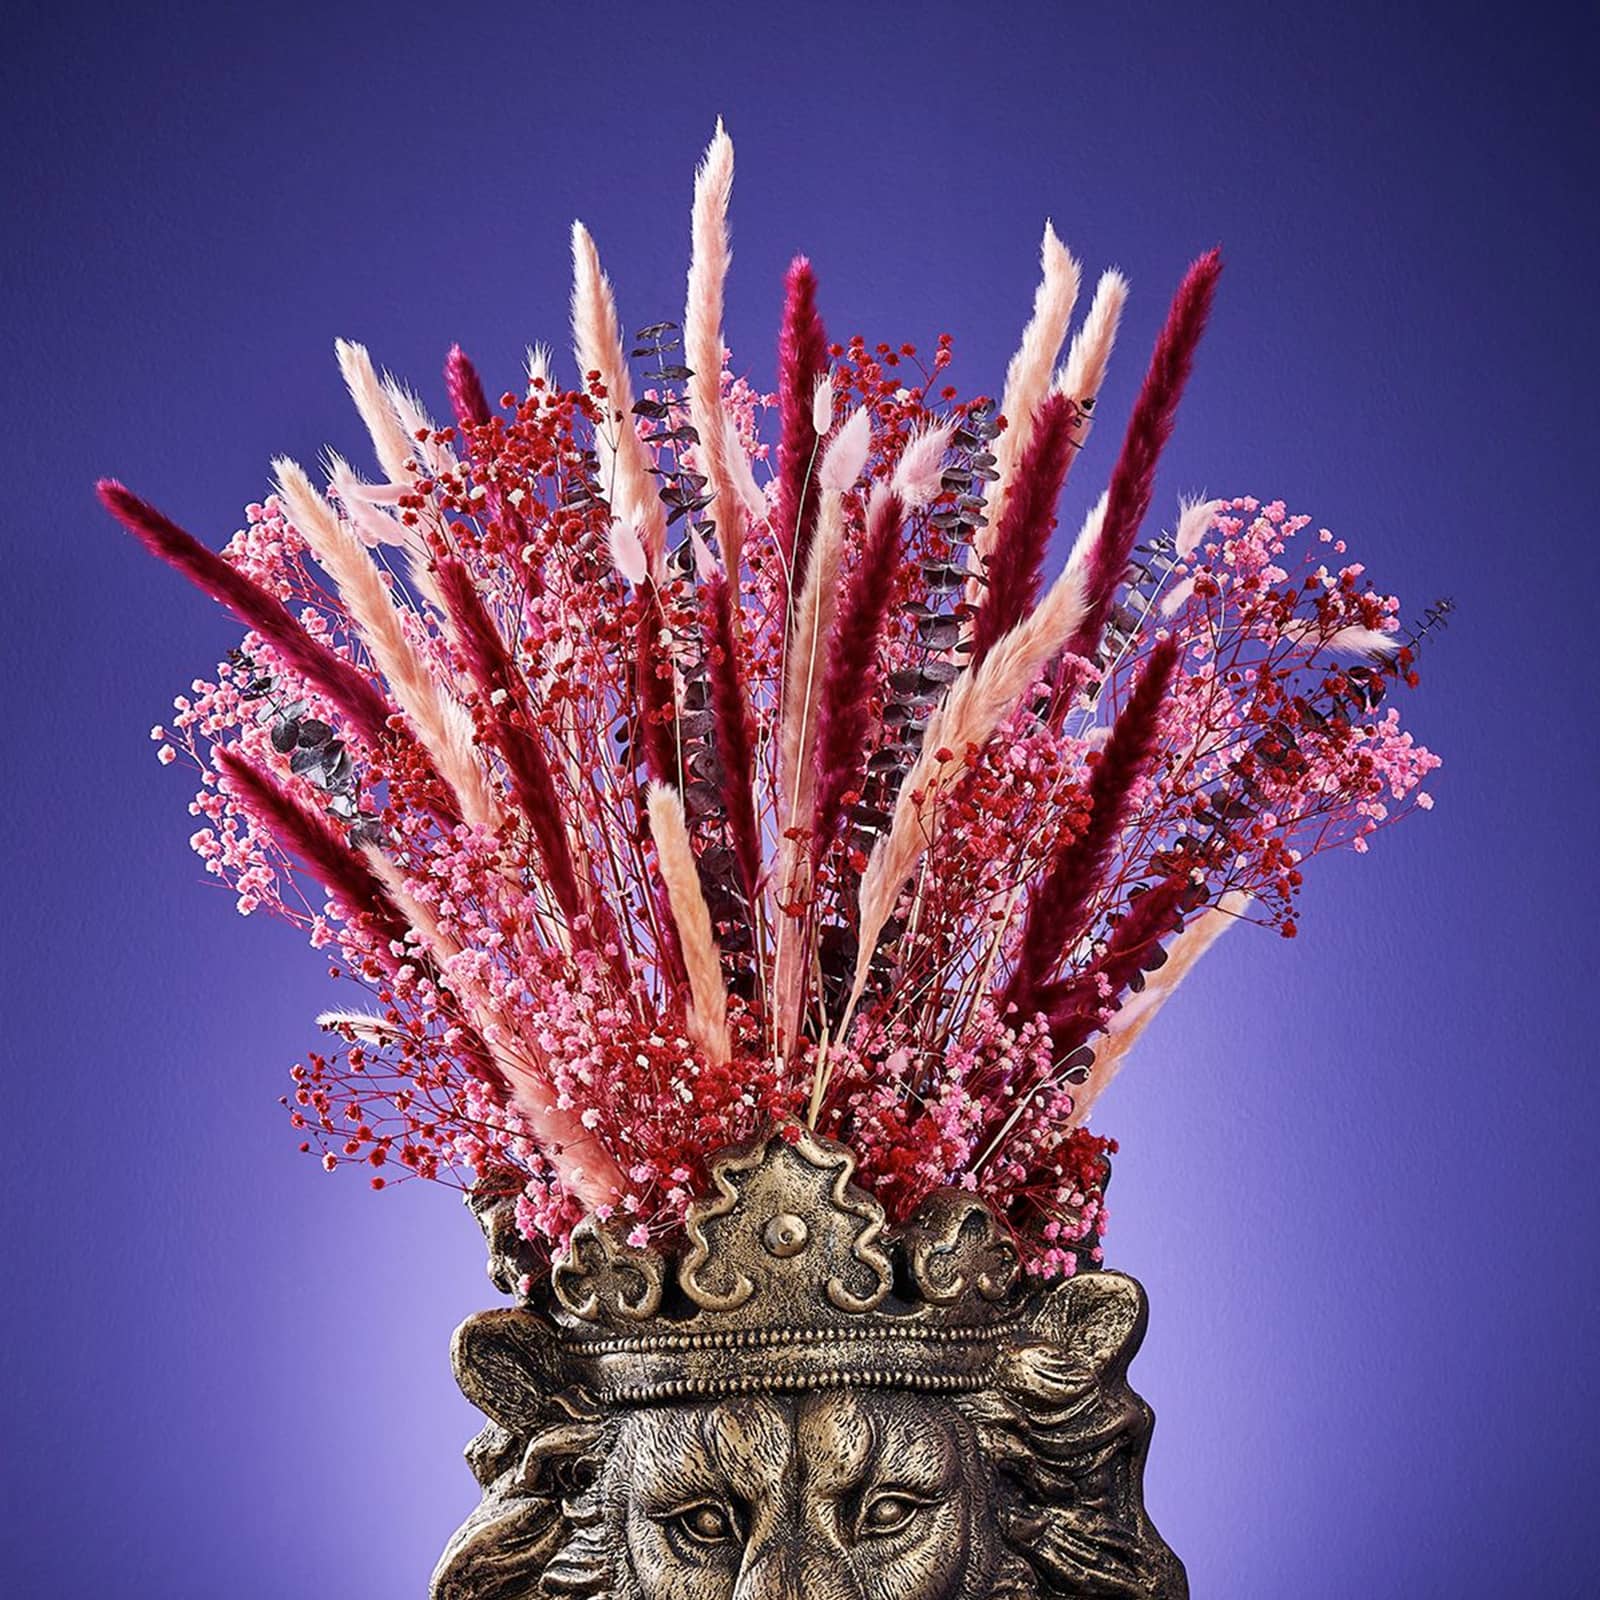 bouquet / bunch of dried flowers Paris, red/pink